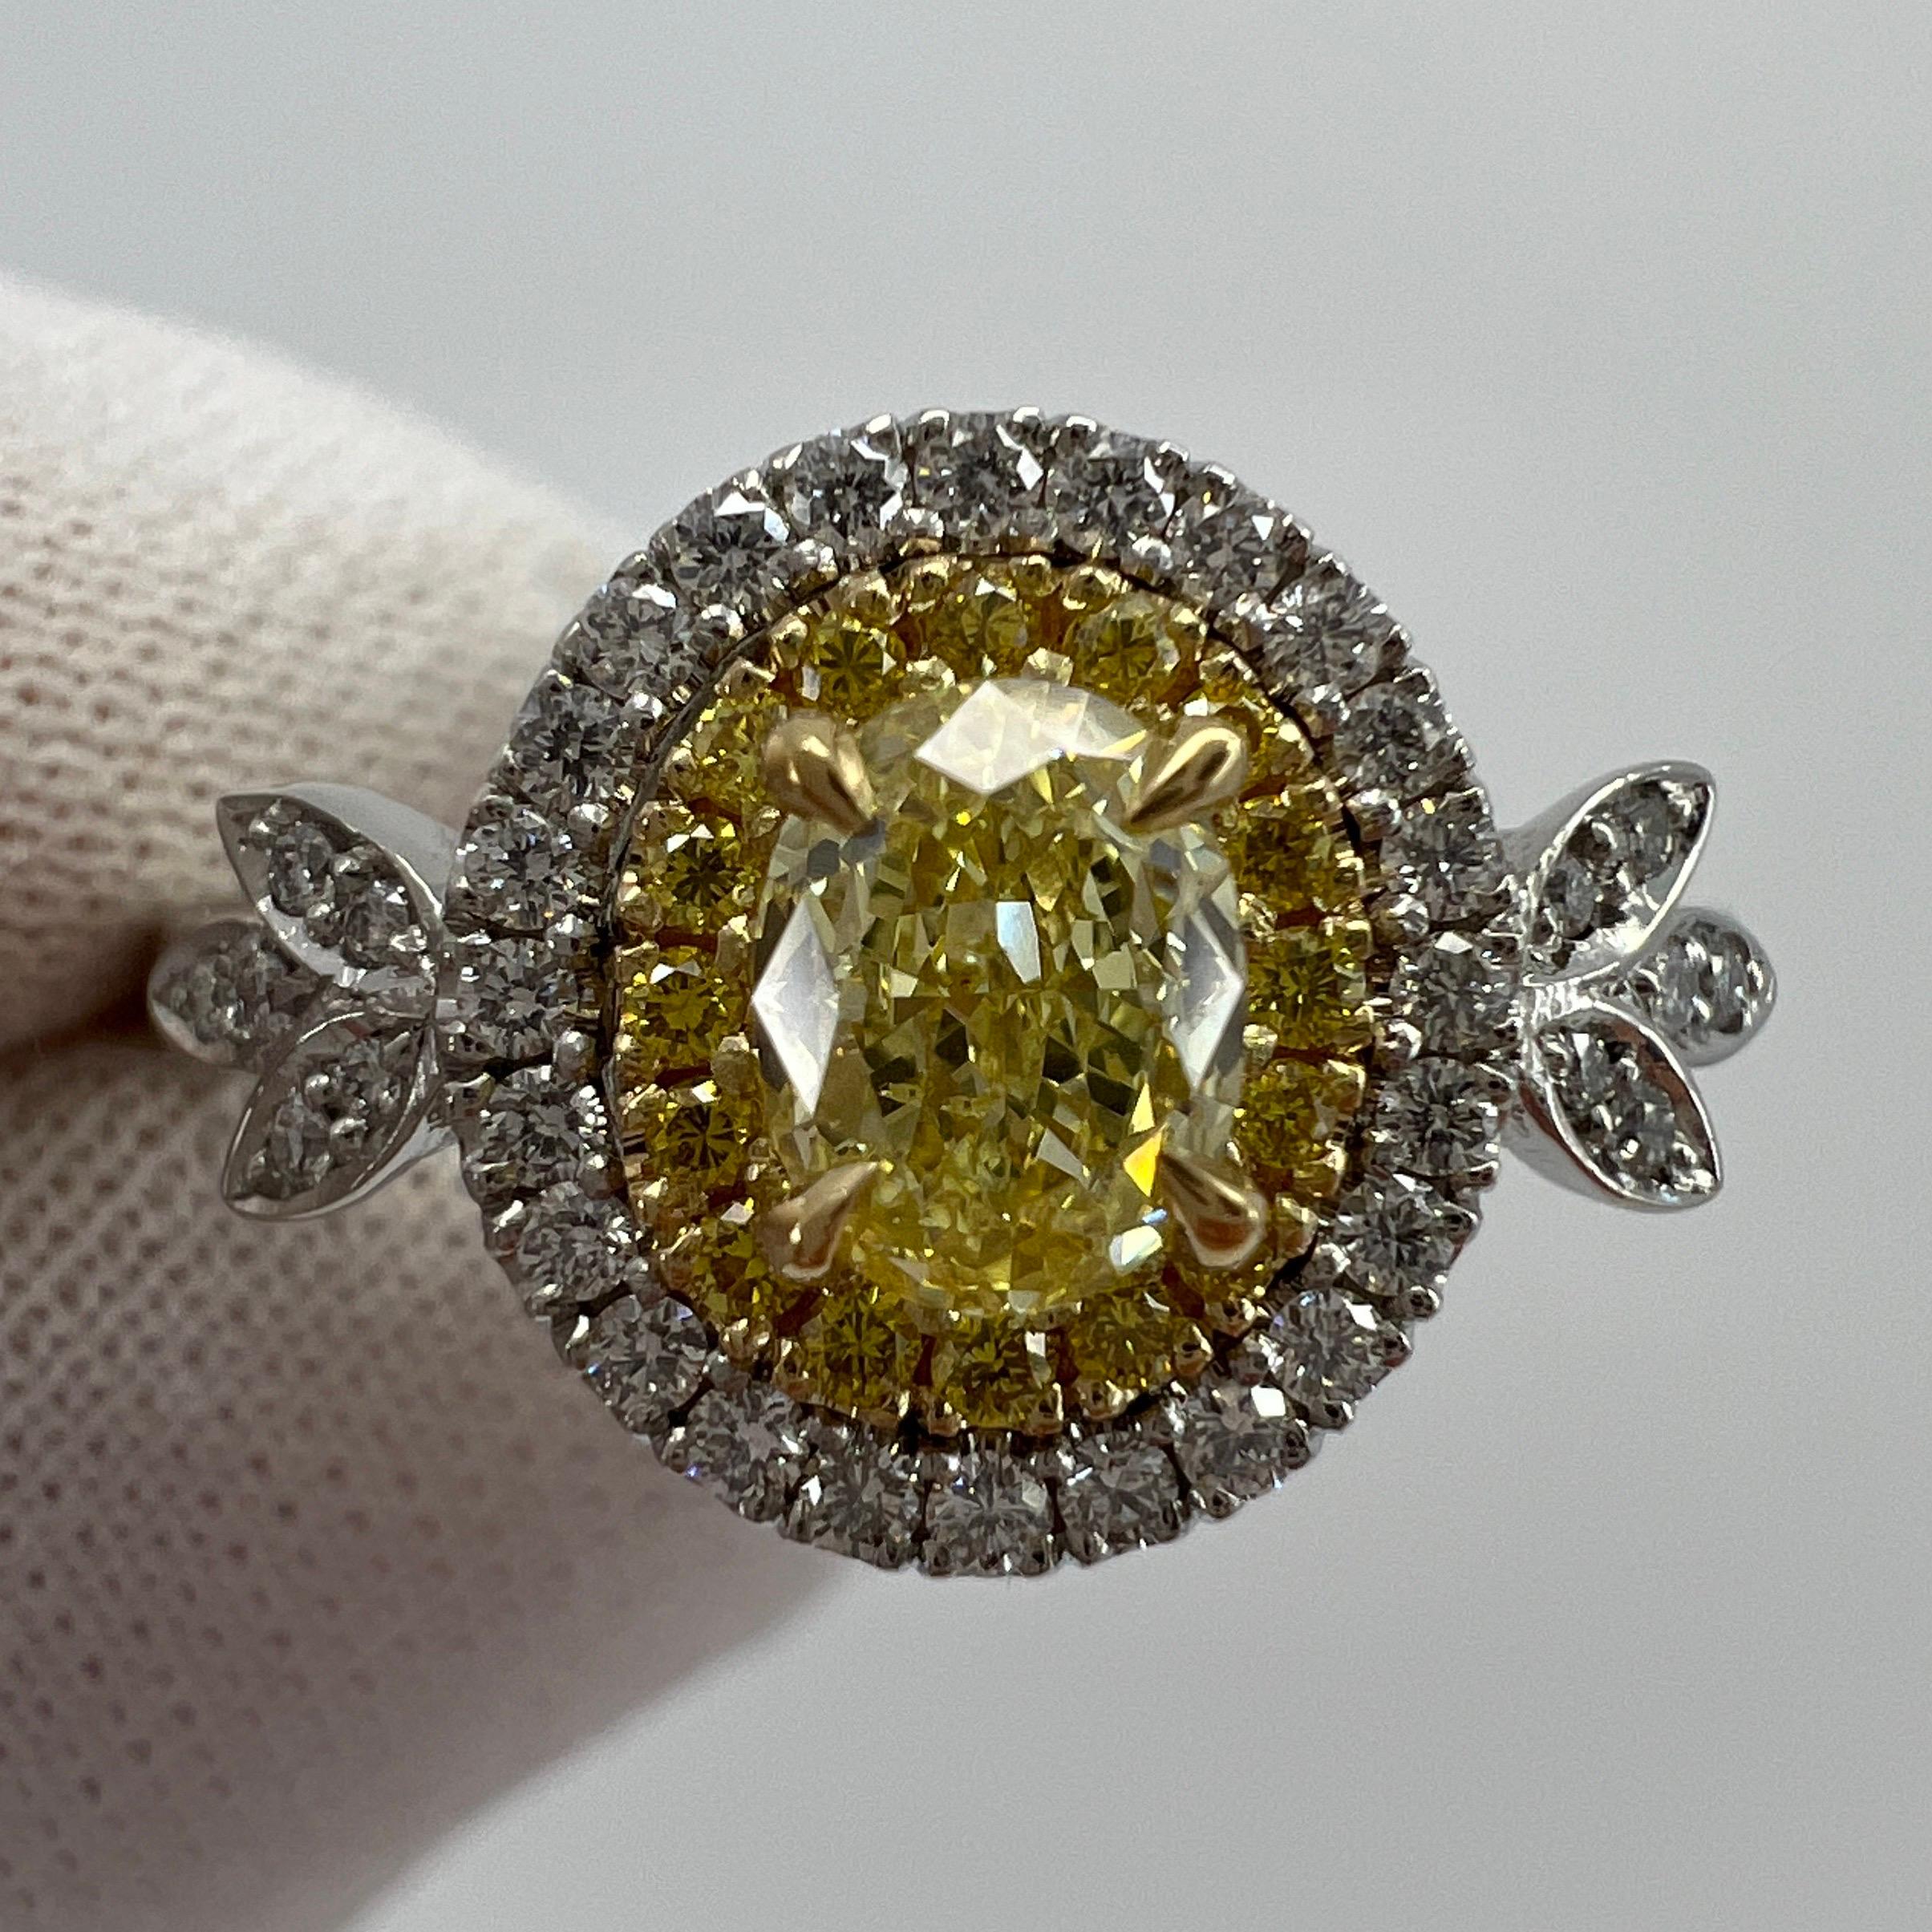 Oval Cut Fancy Yellow & White Diamond Platinum & 18k Yellow Gold Halo Ring.

A beautiful diamond halo ring with a stunning 0.45ct centre fancy yellow VS2 diamond, with an excellent oval cut. Accented by 0.15ct of round cut fancy vivid yellow VS2